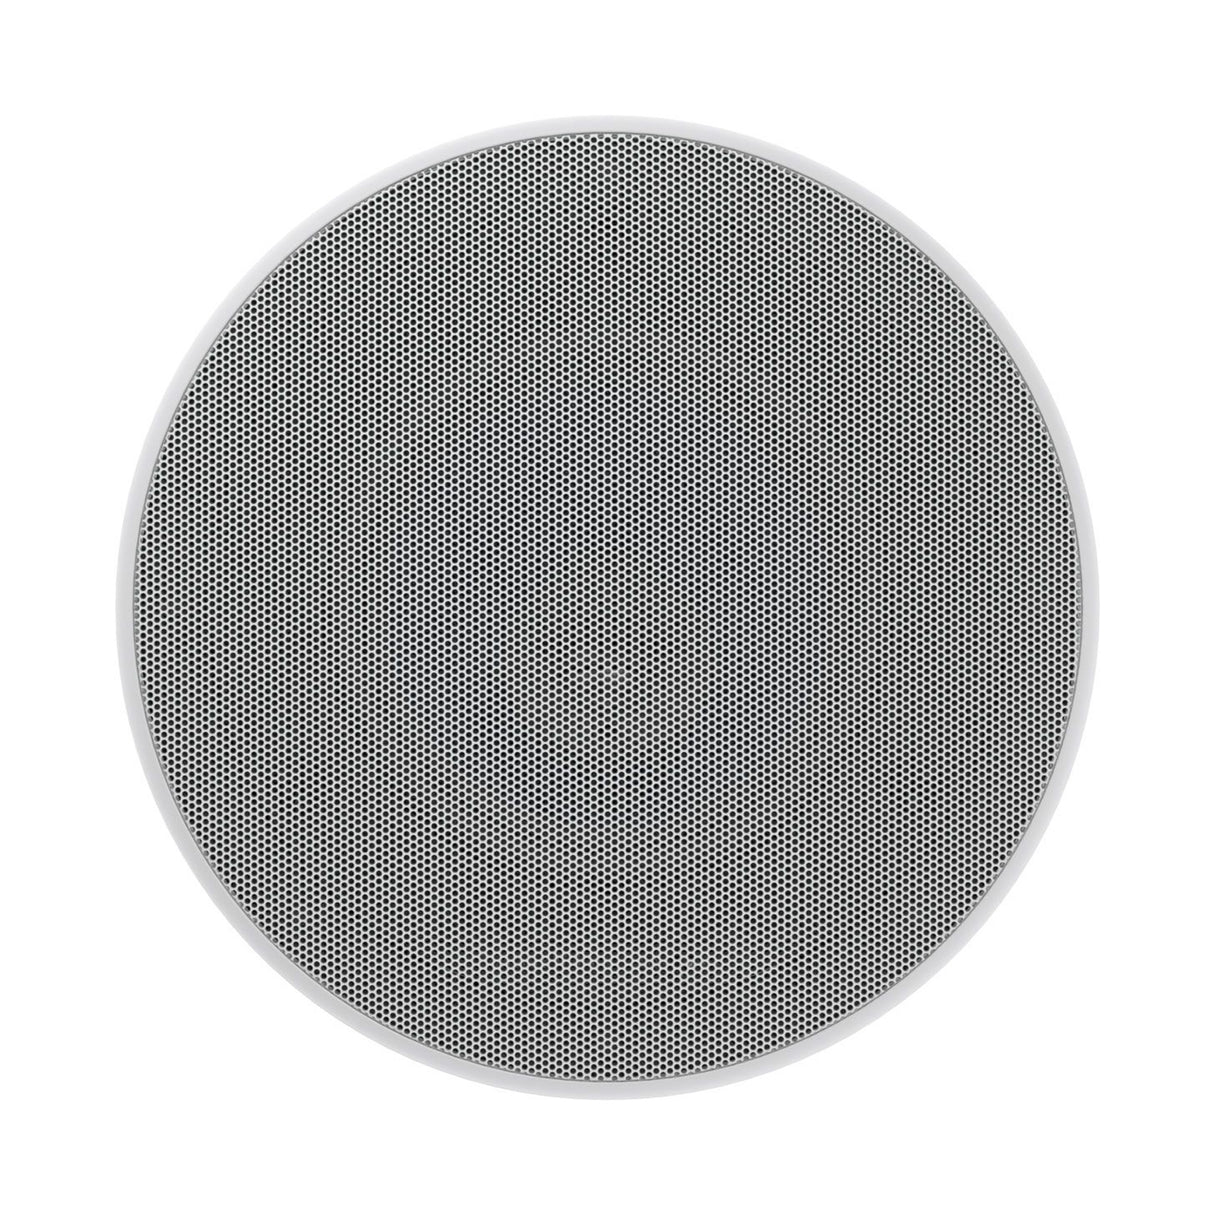 Bowers & Wilkins CCM664- 6 Inches, 2-Way In-Ceiling Speaker (Each)